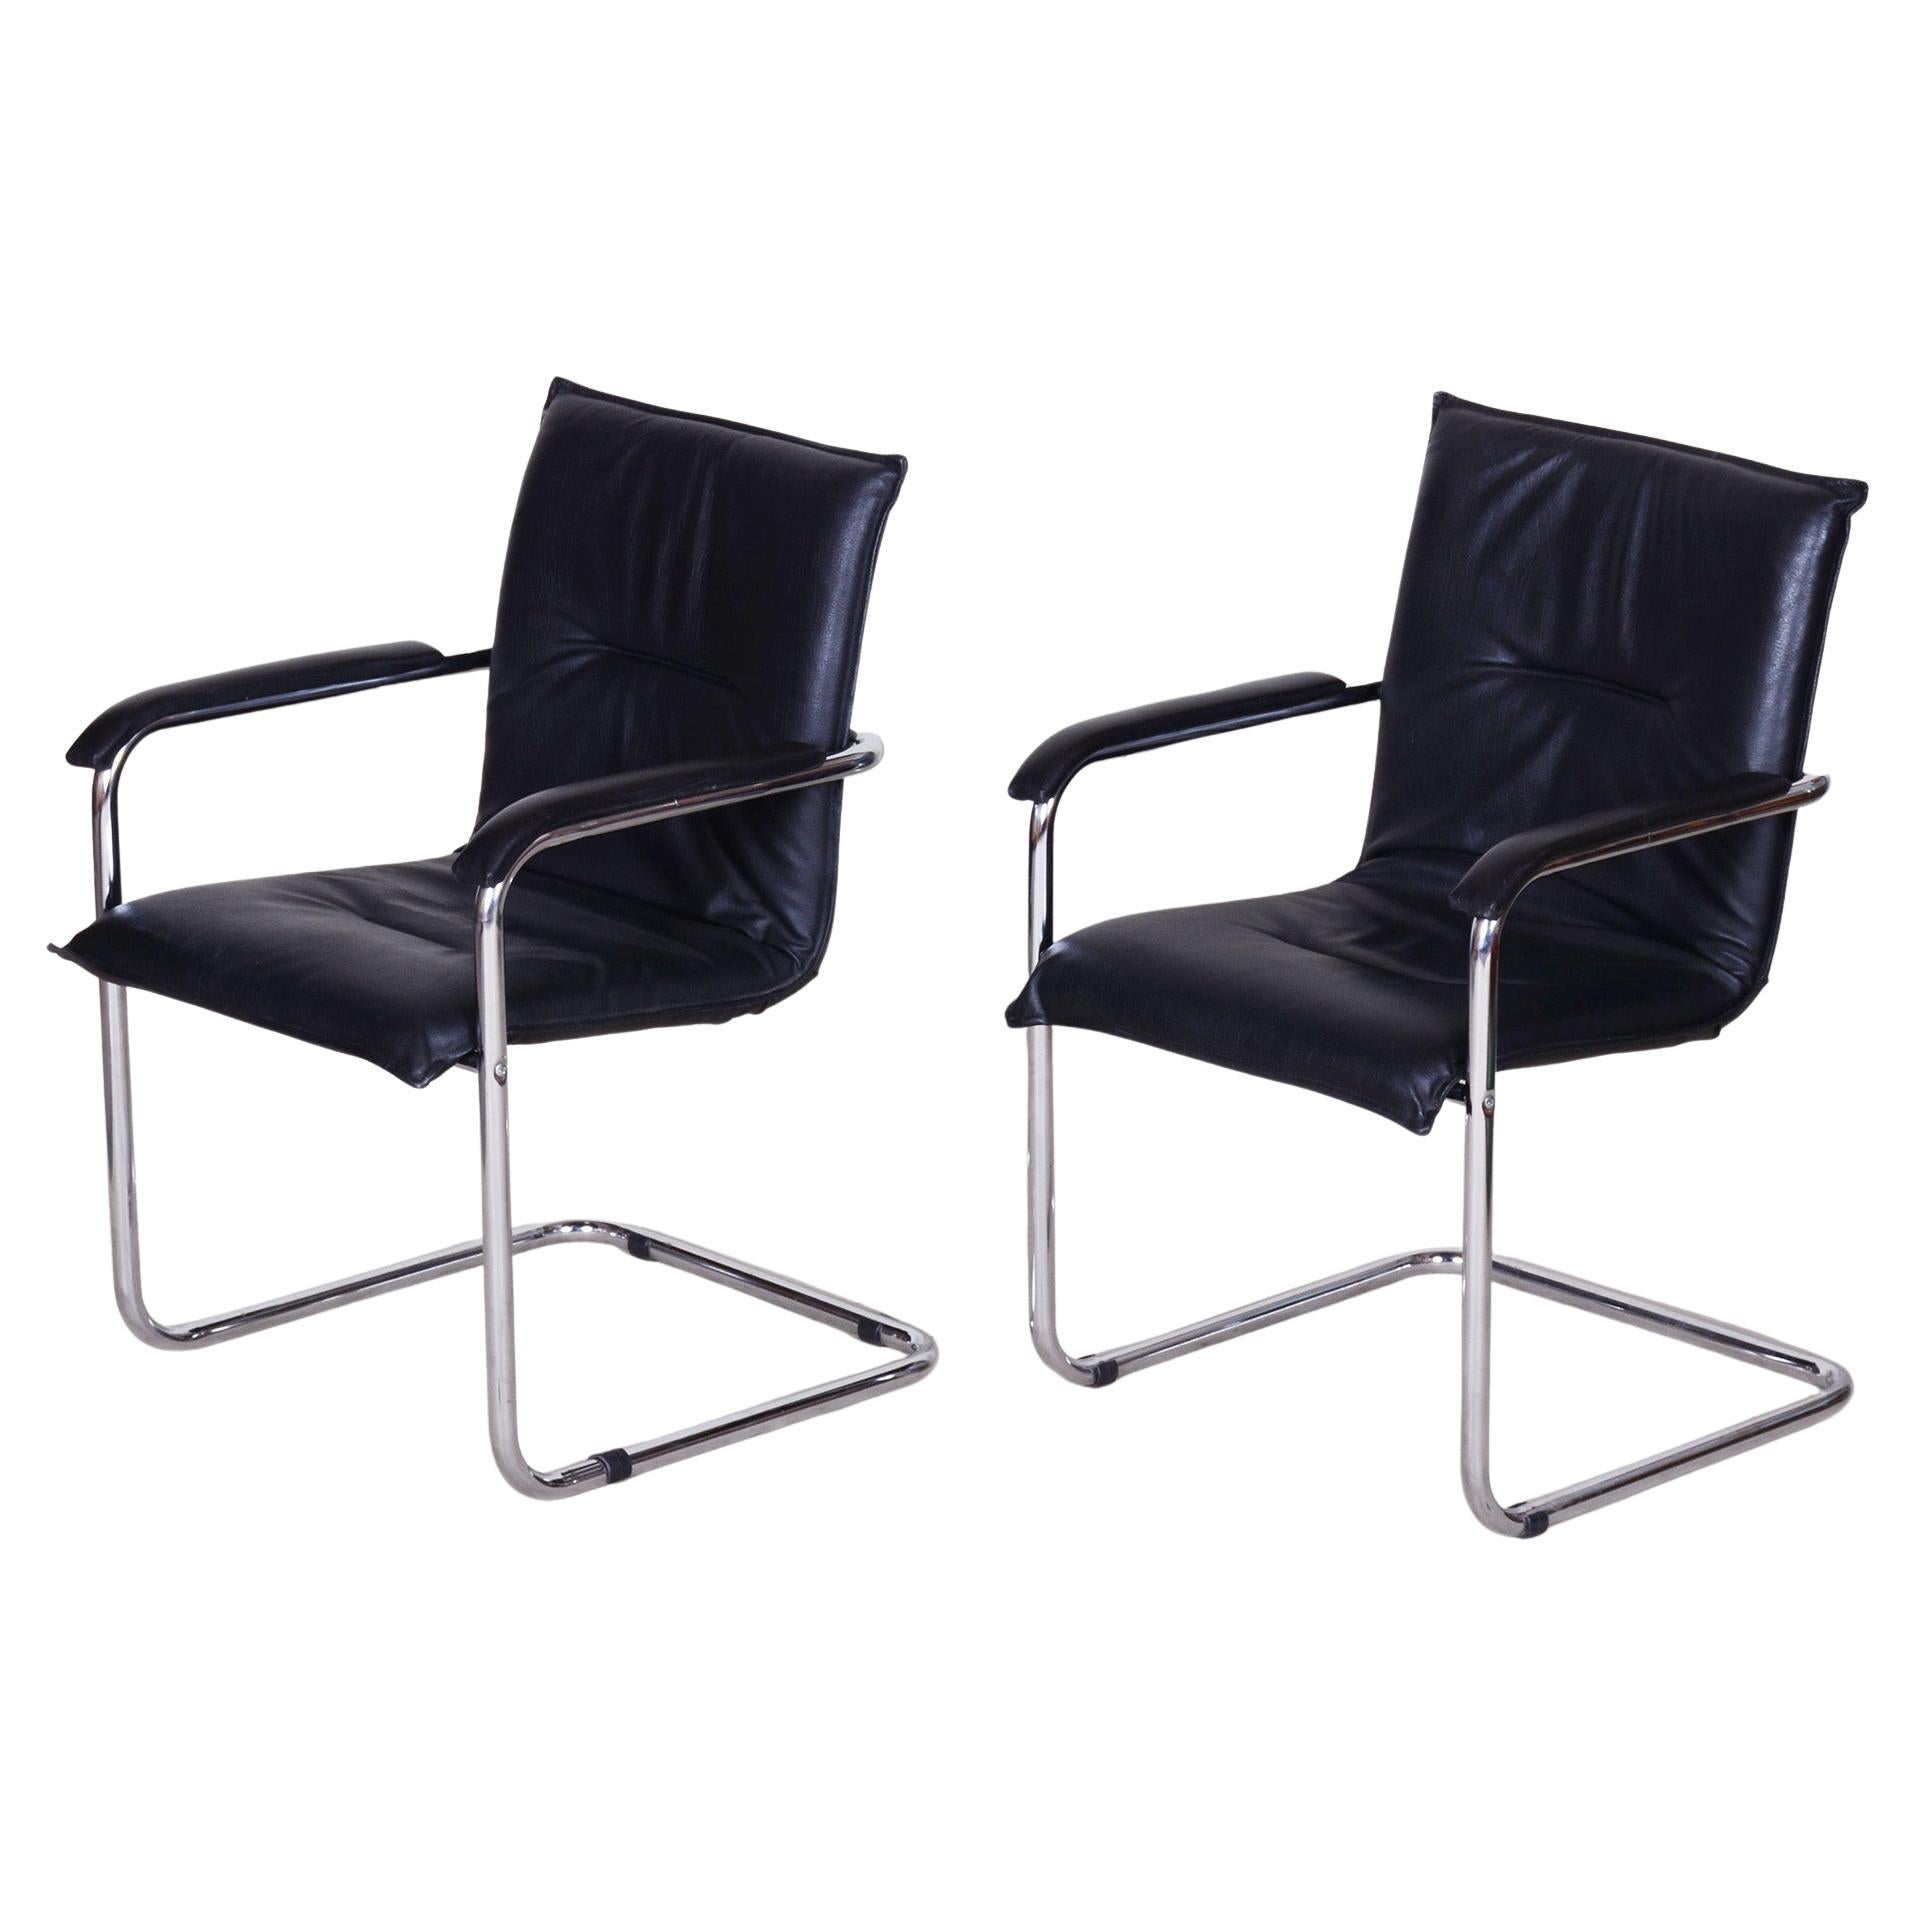 Pair of Black Bauhaus Chairs, Artificial Leather, 1970s, Germany For Sale